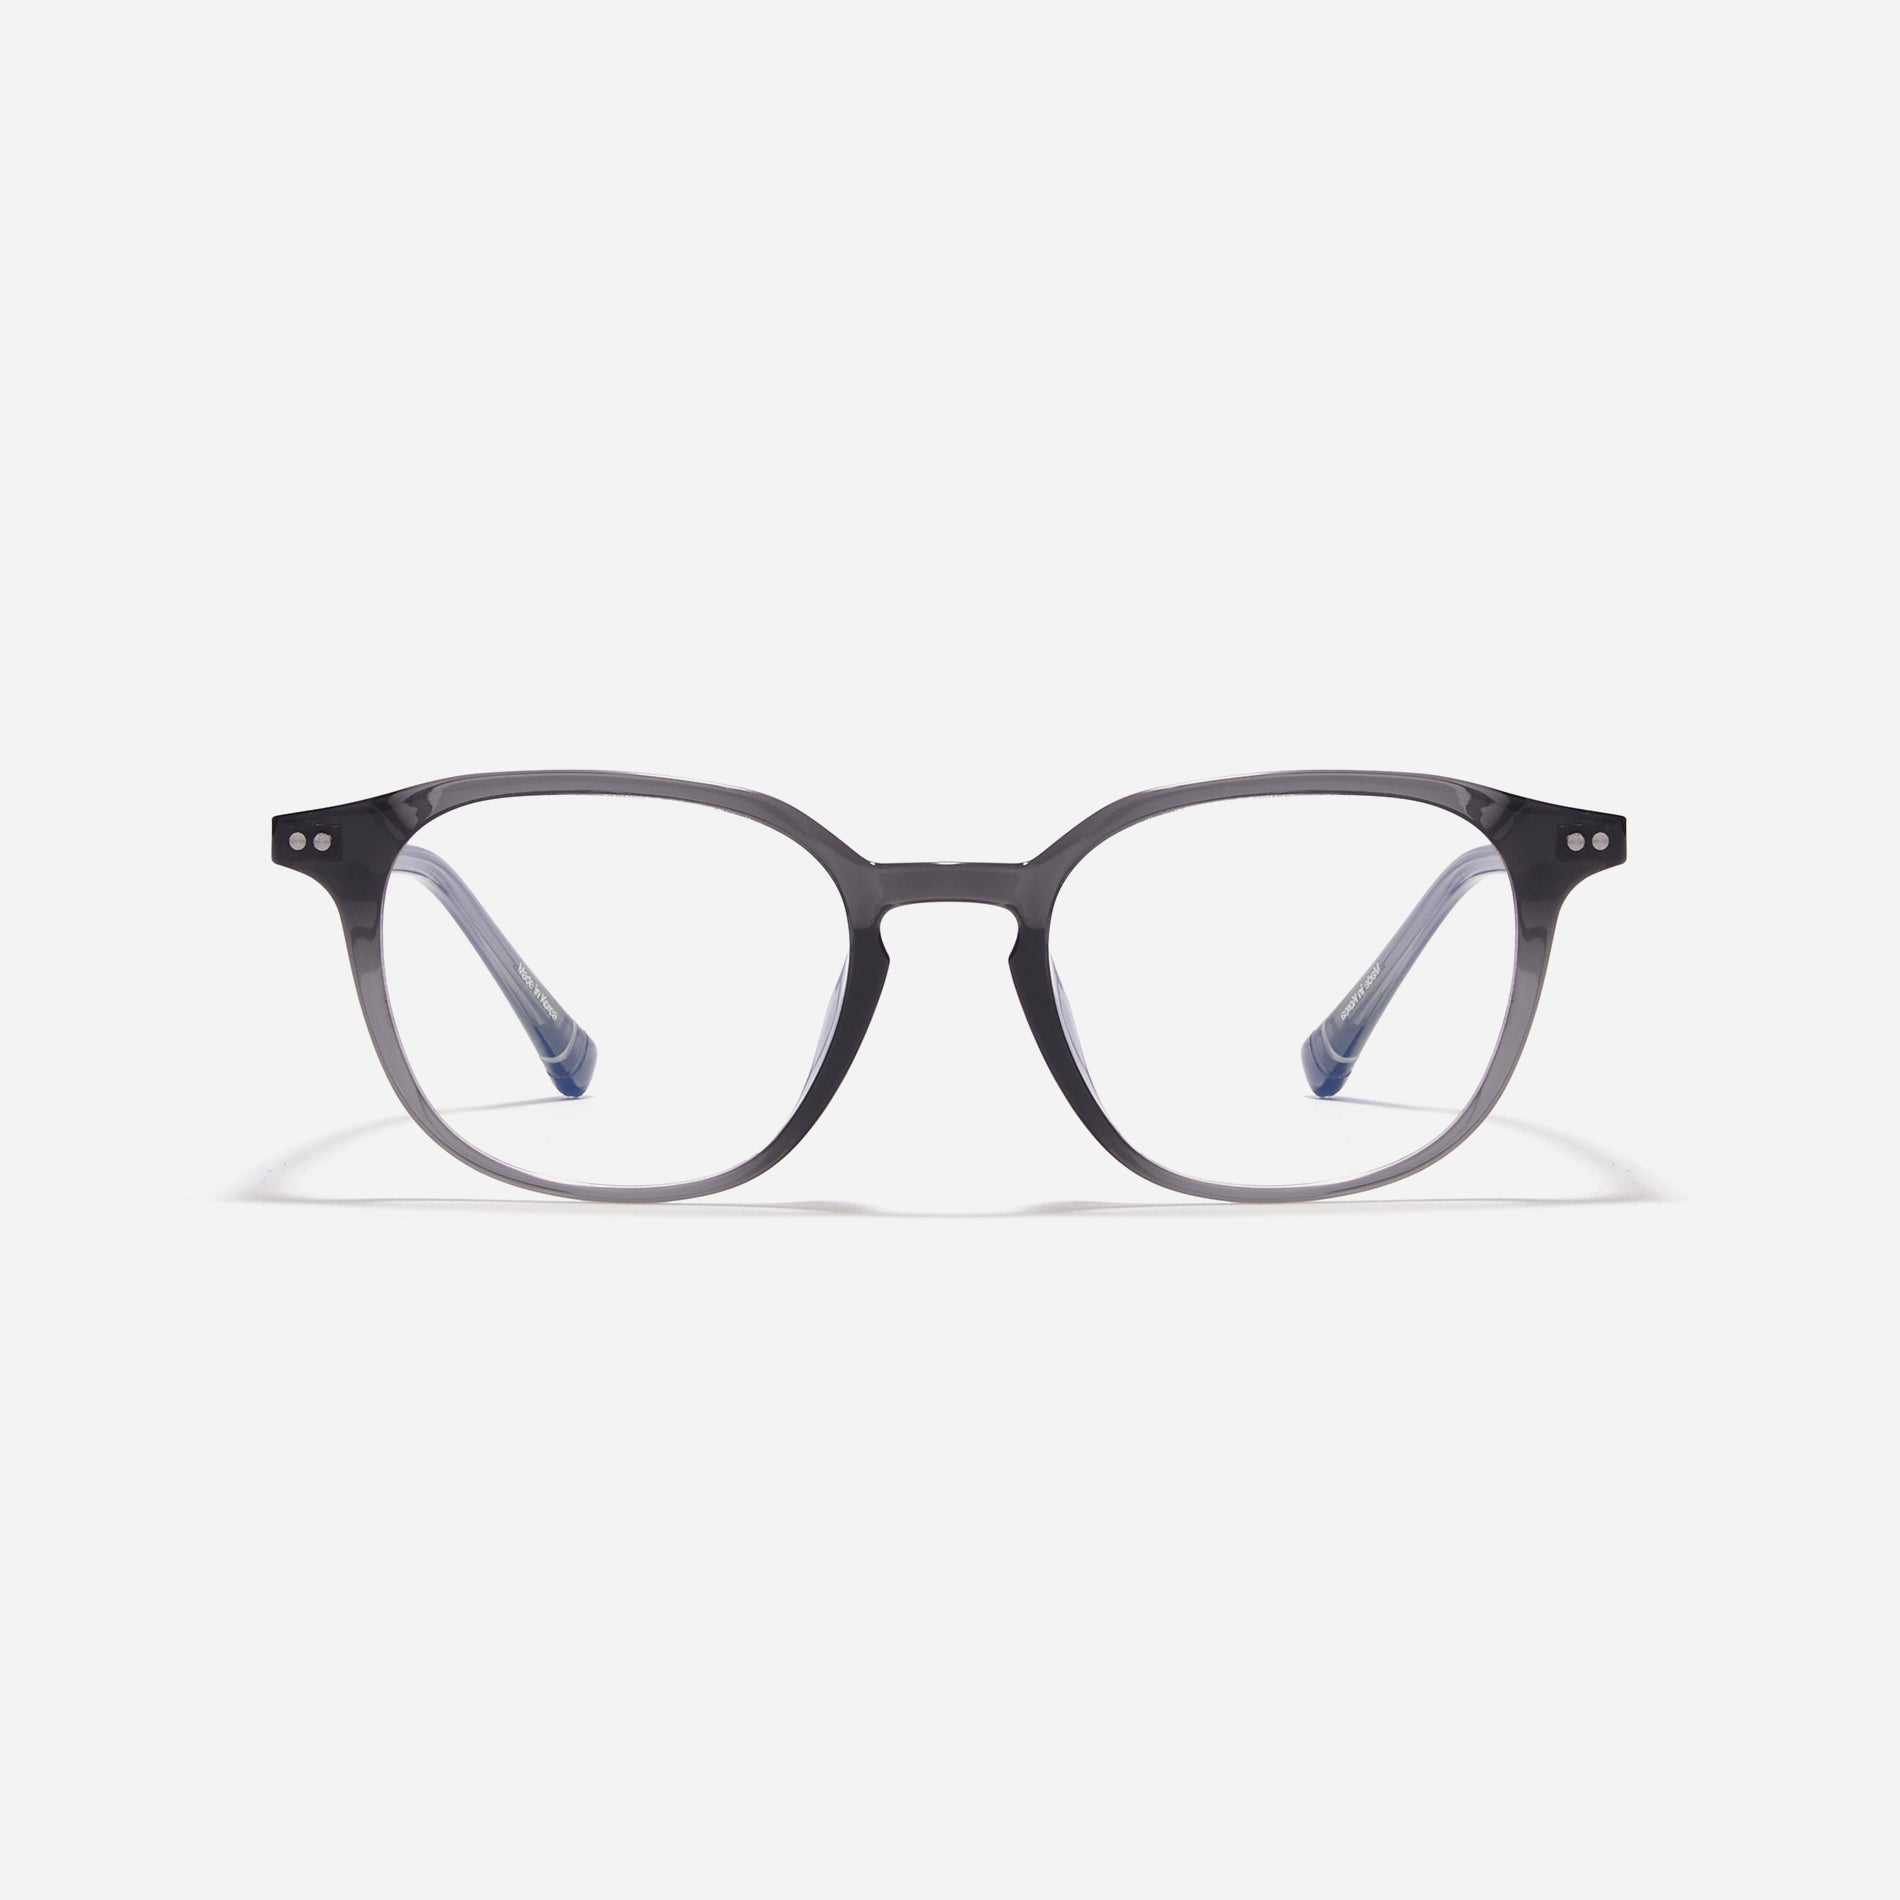 Round-shaped horn-rimmed eyeglasses featuring a sturdy and lightweight frame, Duve design incorporates dual lining on the tips to prevent slipping and ensure a consistently comfortable wearing experience.